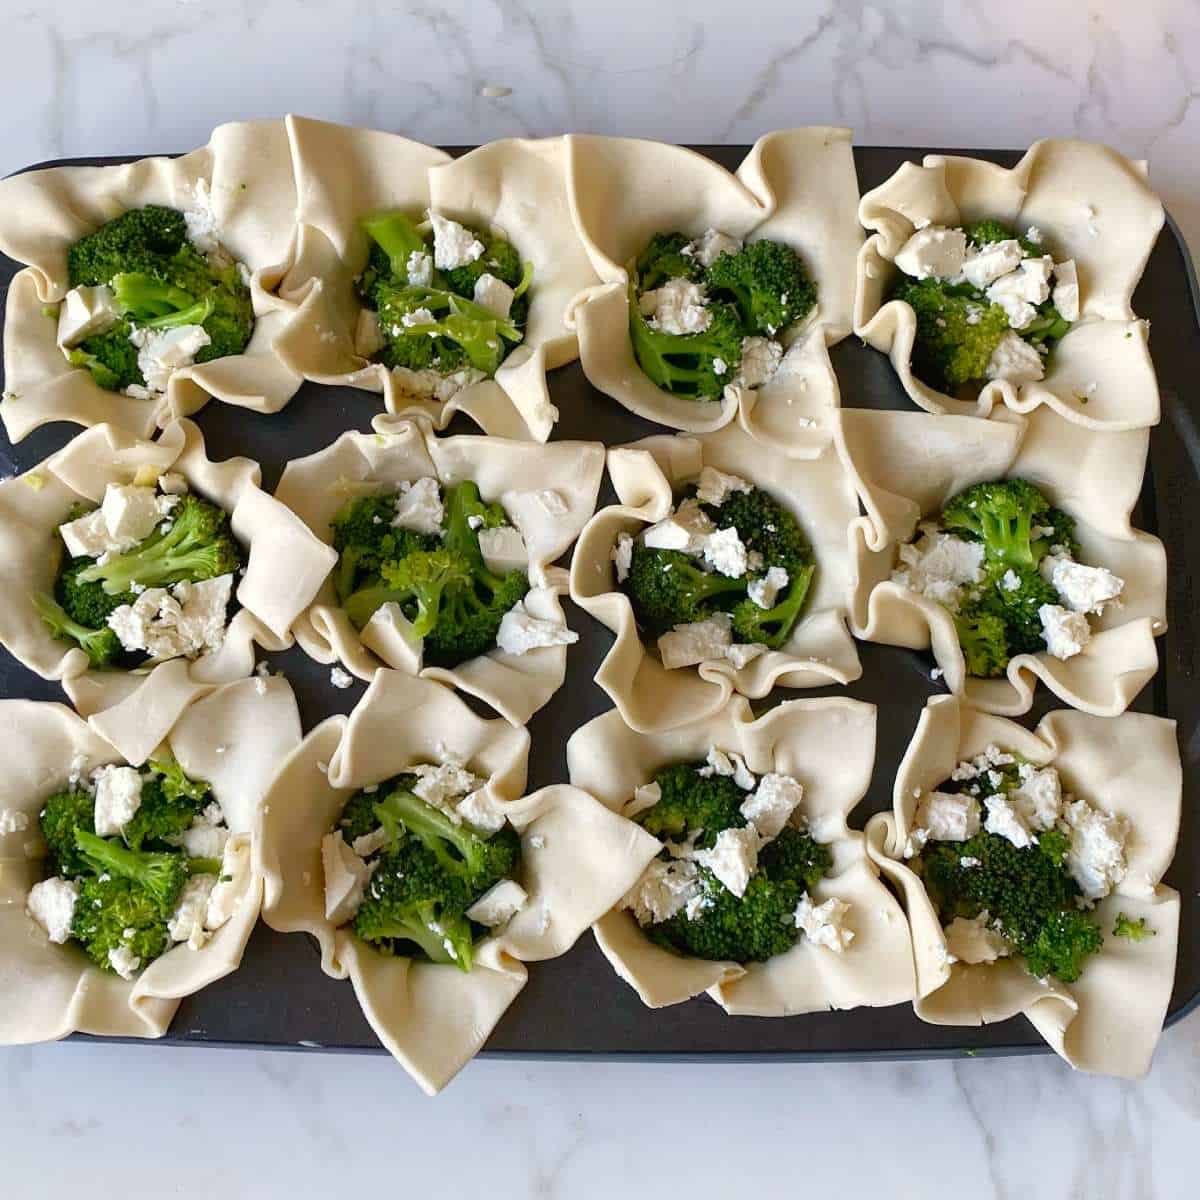 Broccoli and feta inside the individual pastry sheets for Broccoli and Feta Tarts